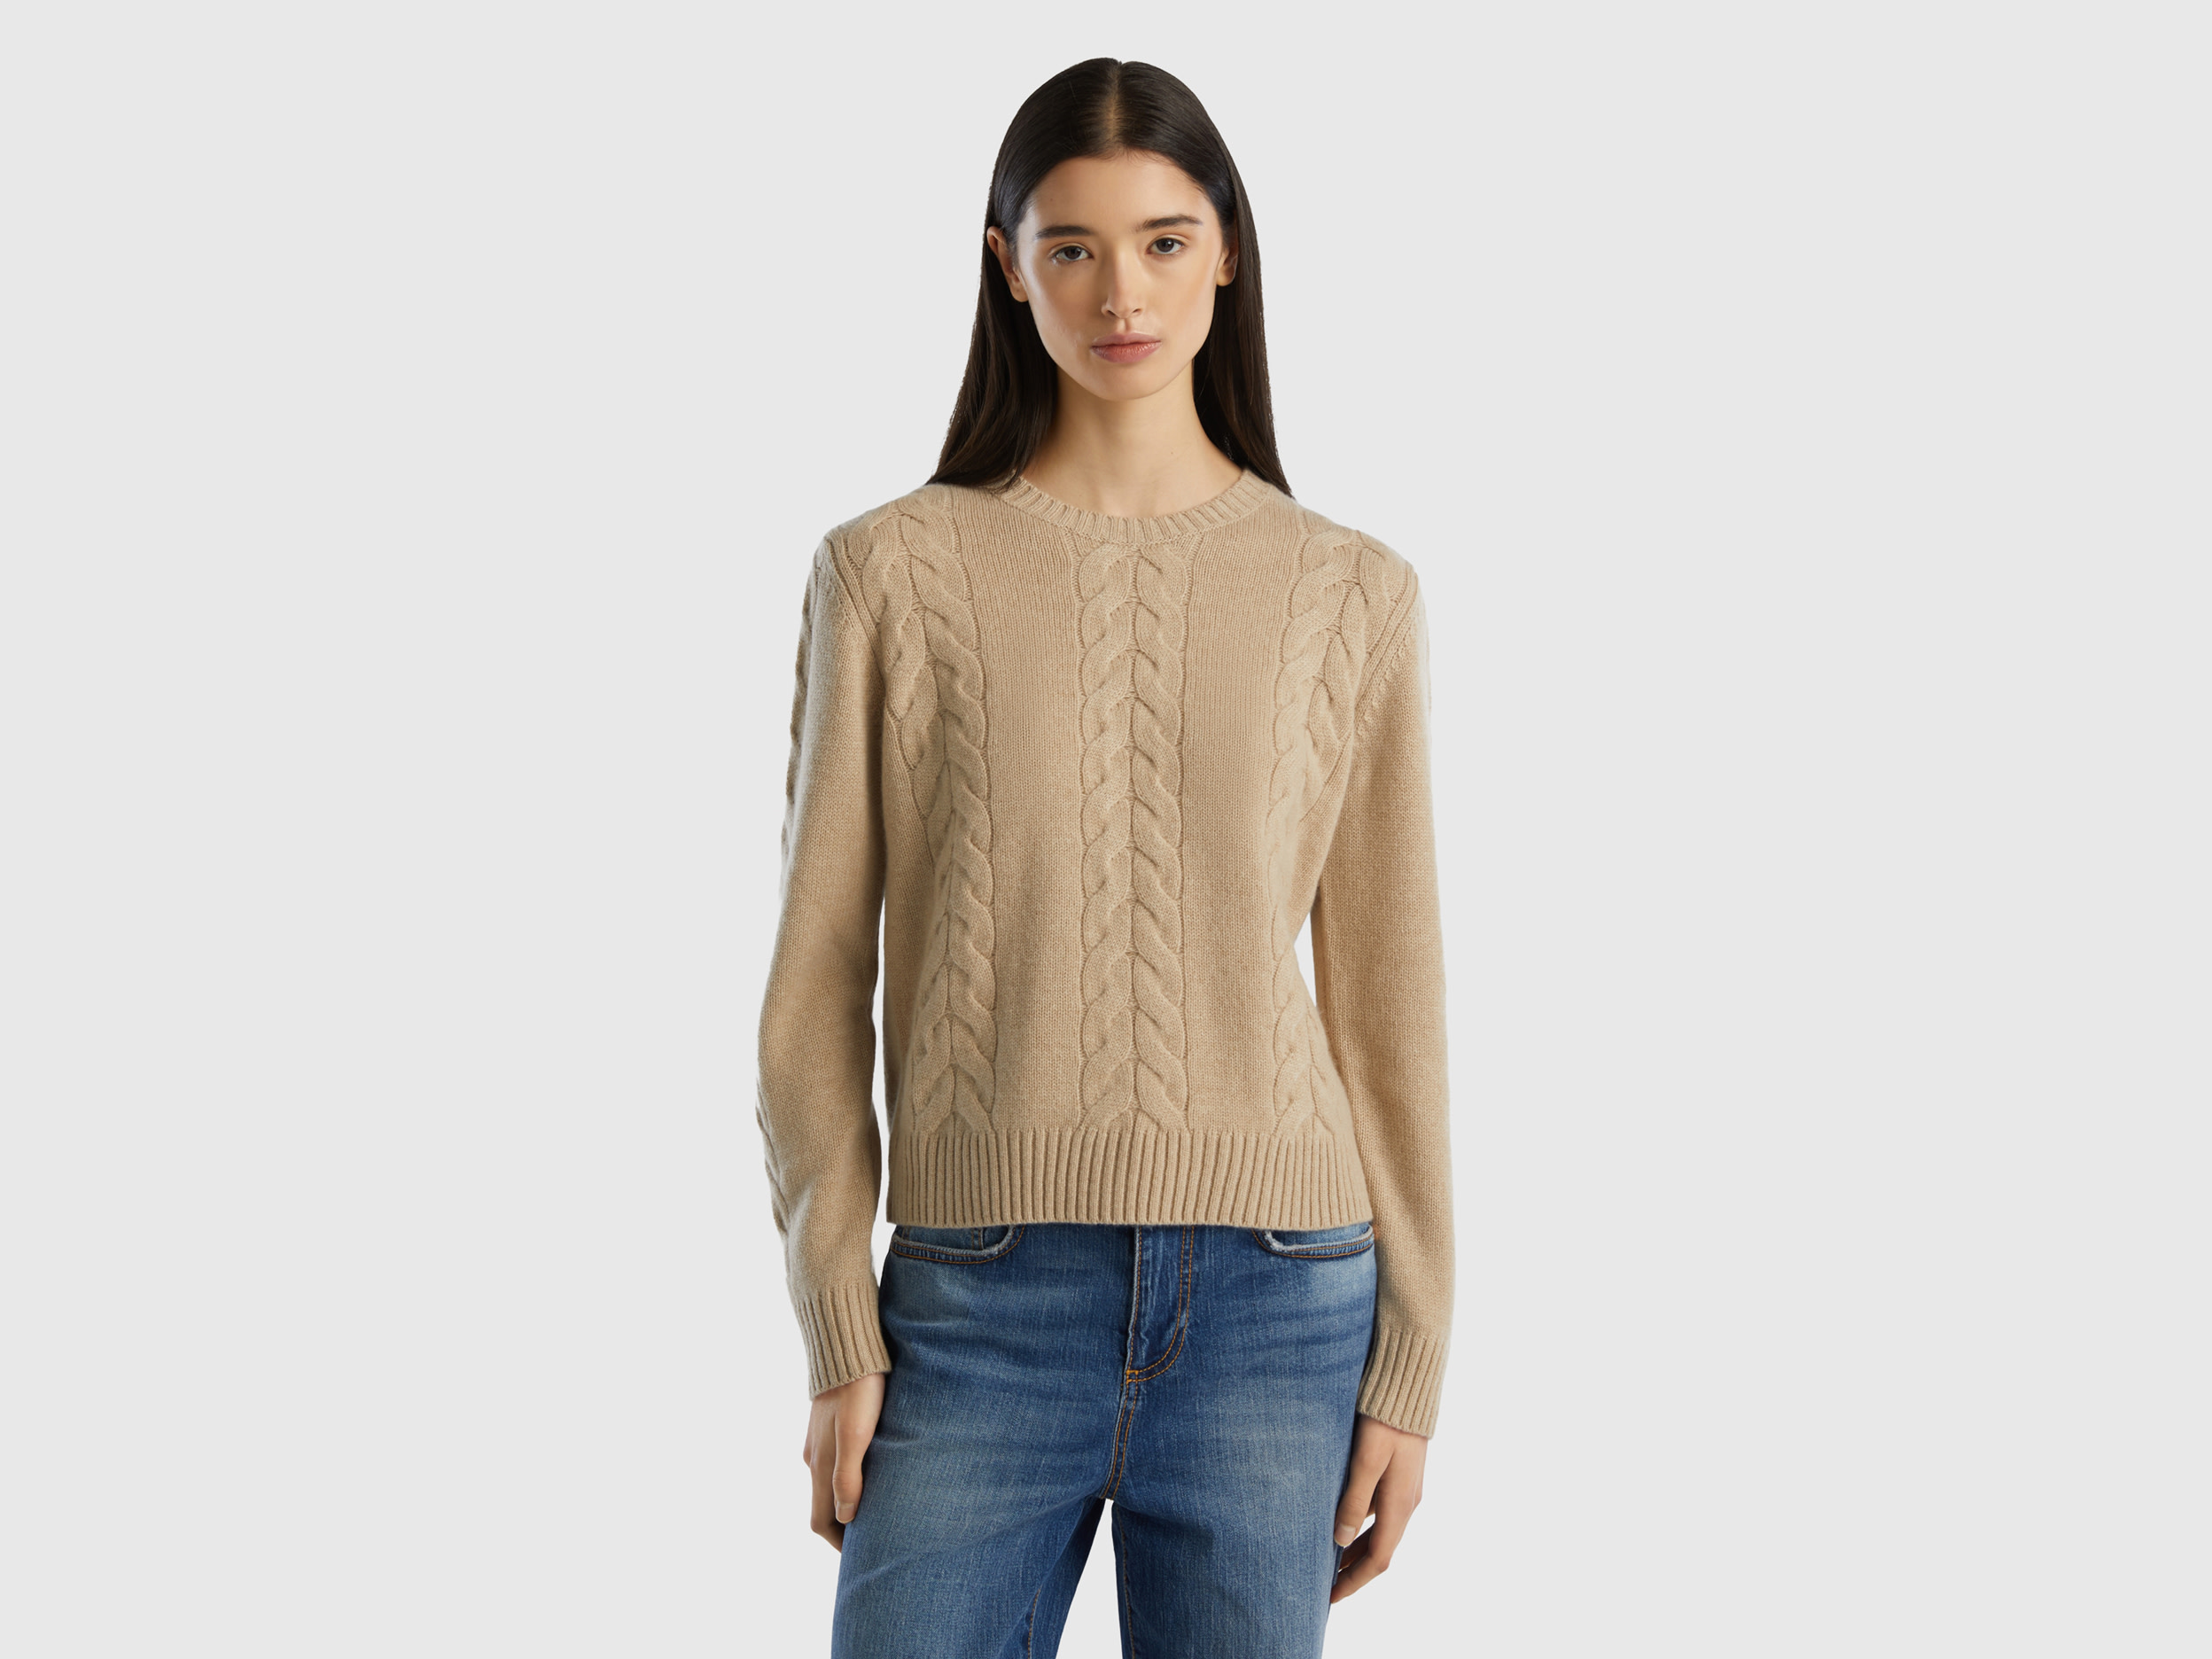 Benetton, Cable Knit Sweater In Pure Cashmere, size S, Beige, Women